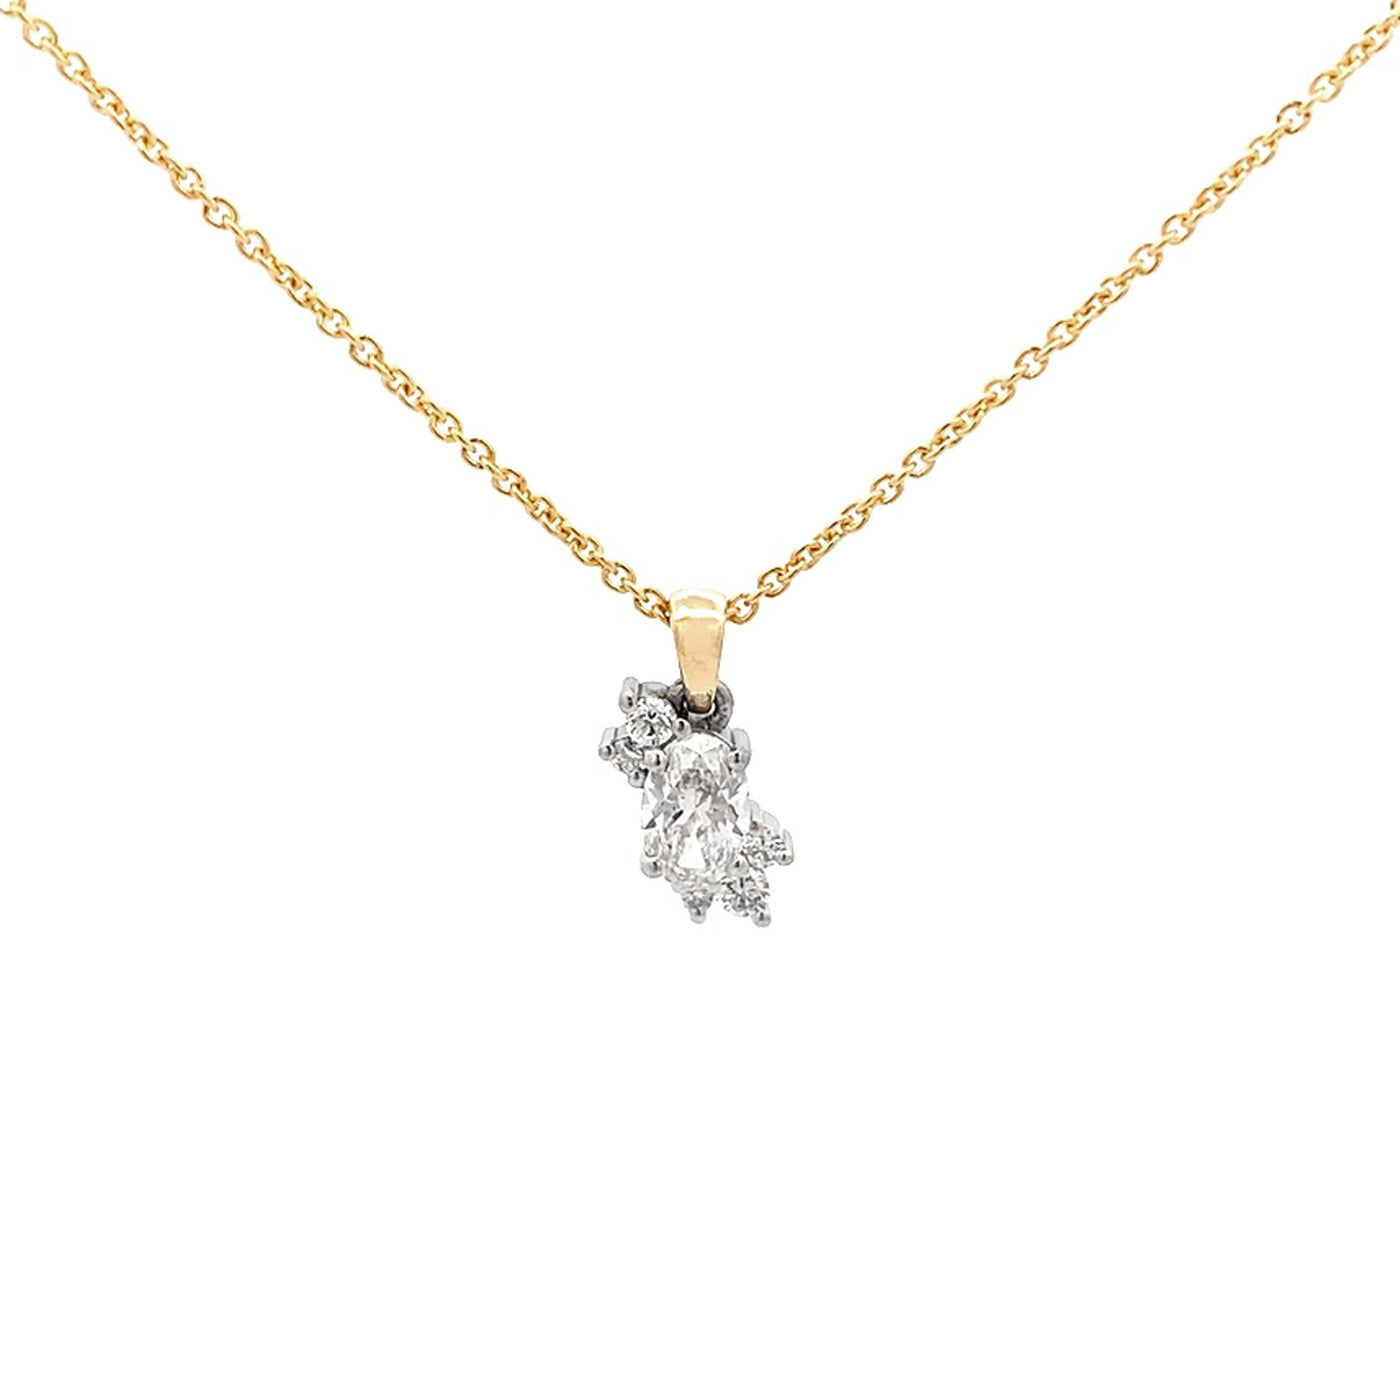 Oval Cut Diamond Cluster Pendant in Yellow Gold | 0.50ctw